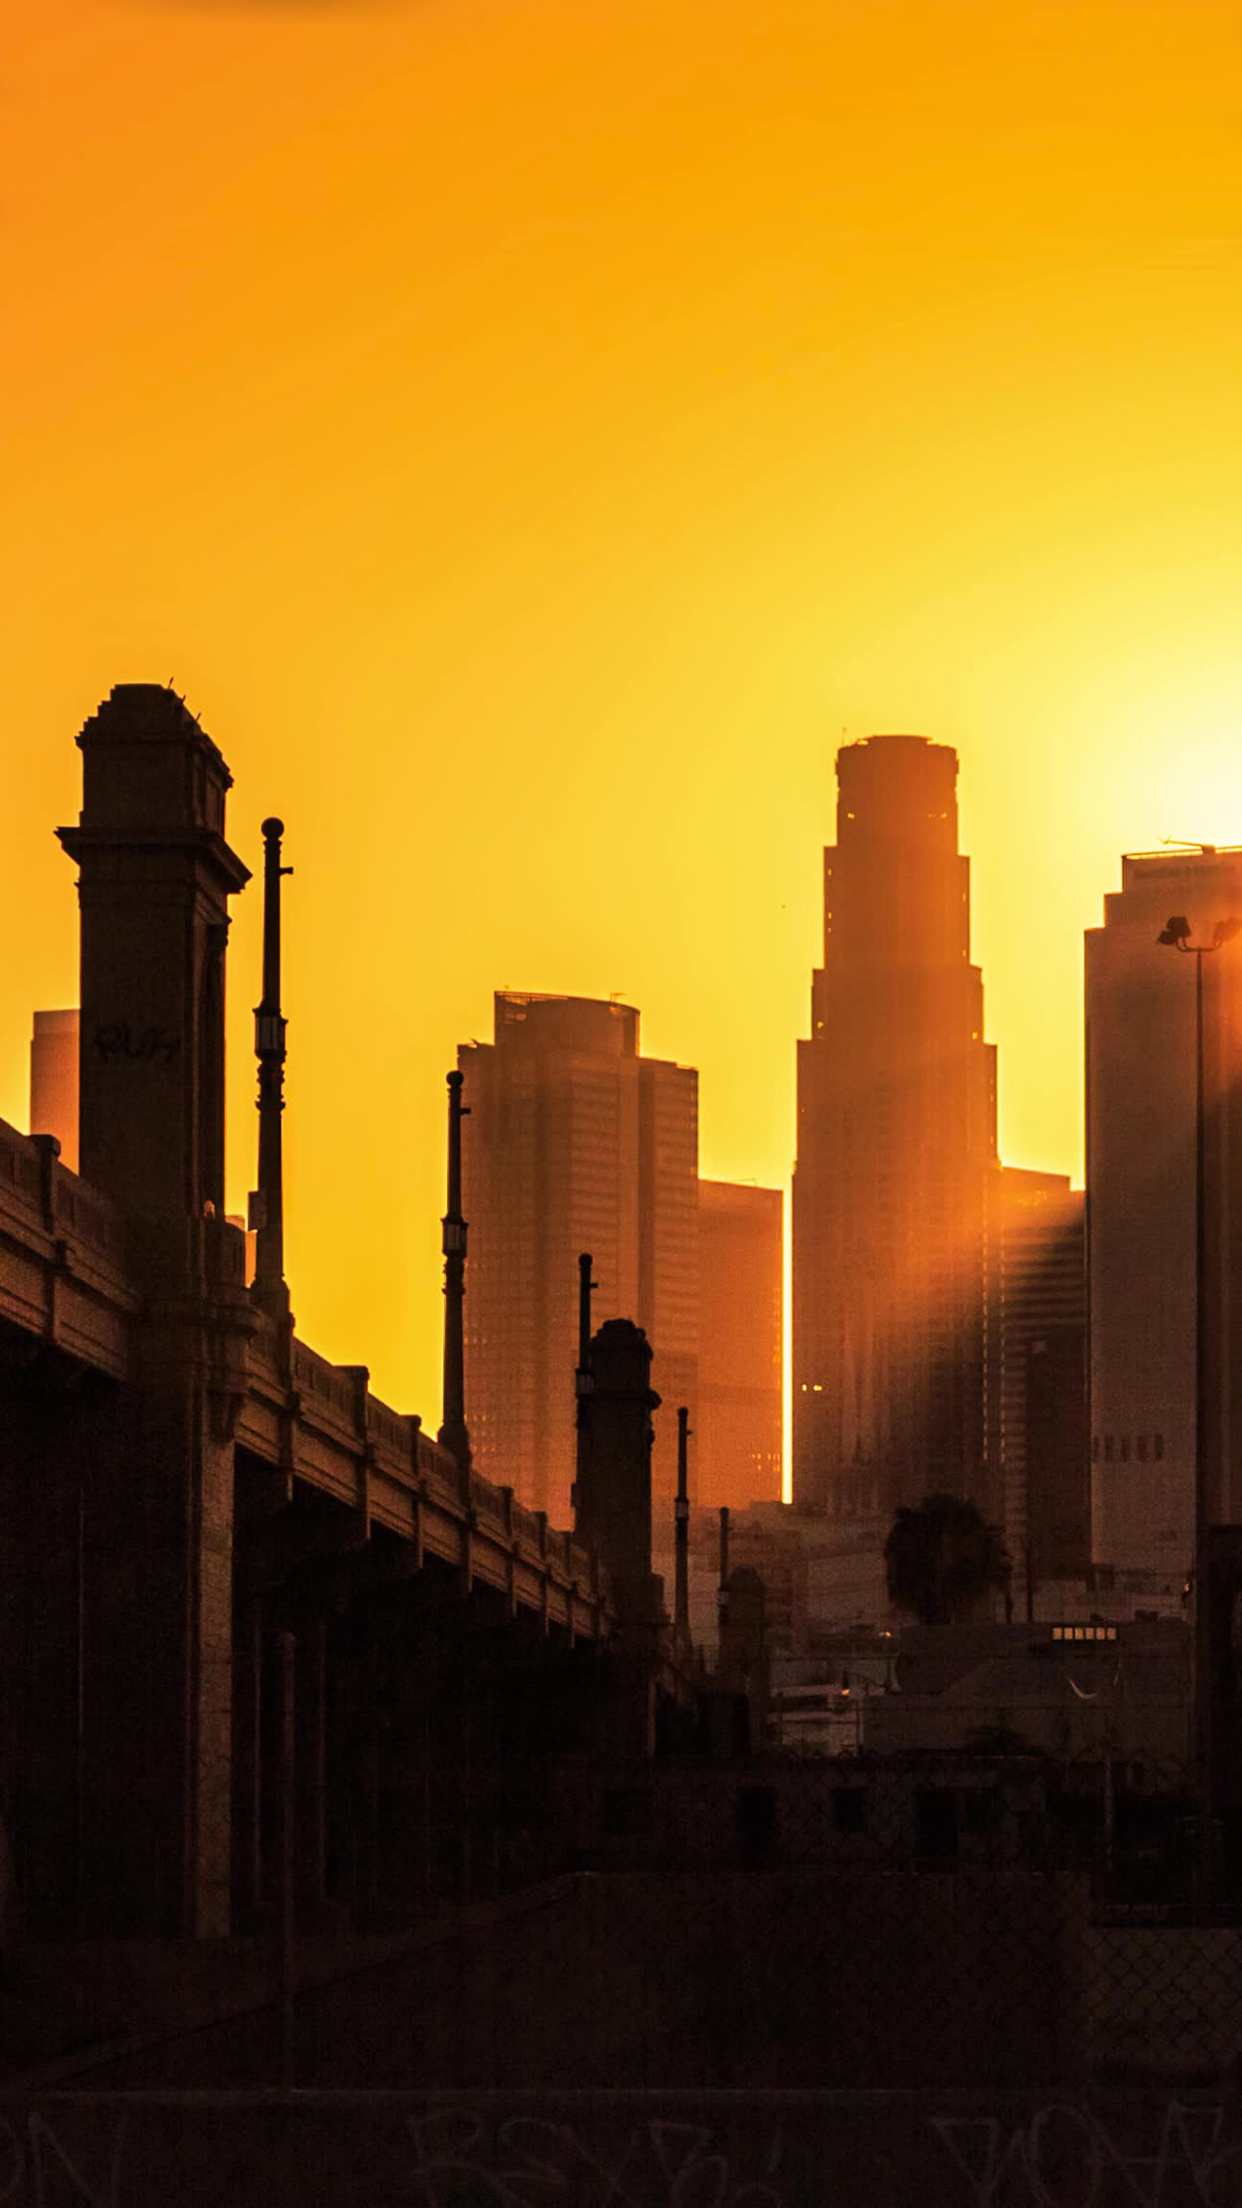 Los Angeles City Sunset Wallpaper for iPhone Pro Max, X, 6